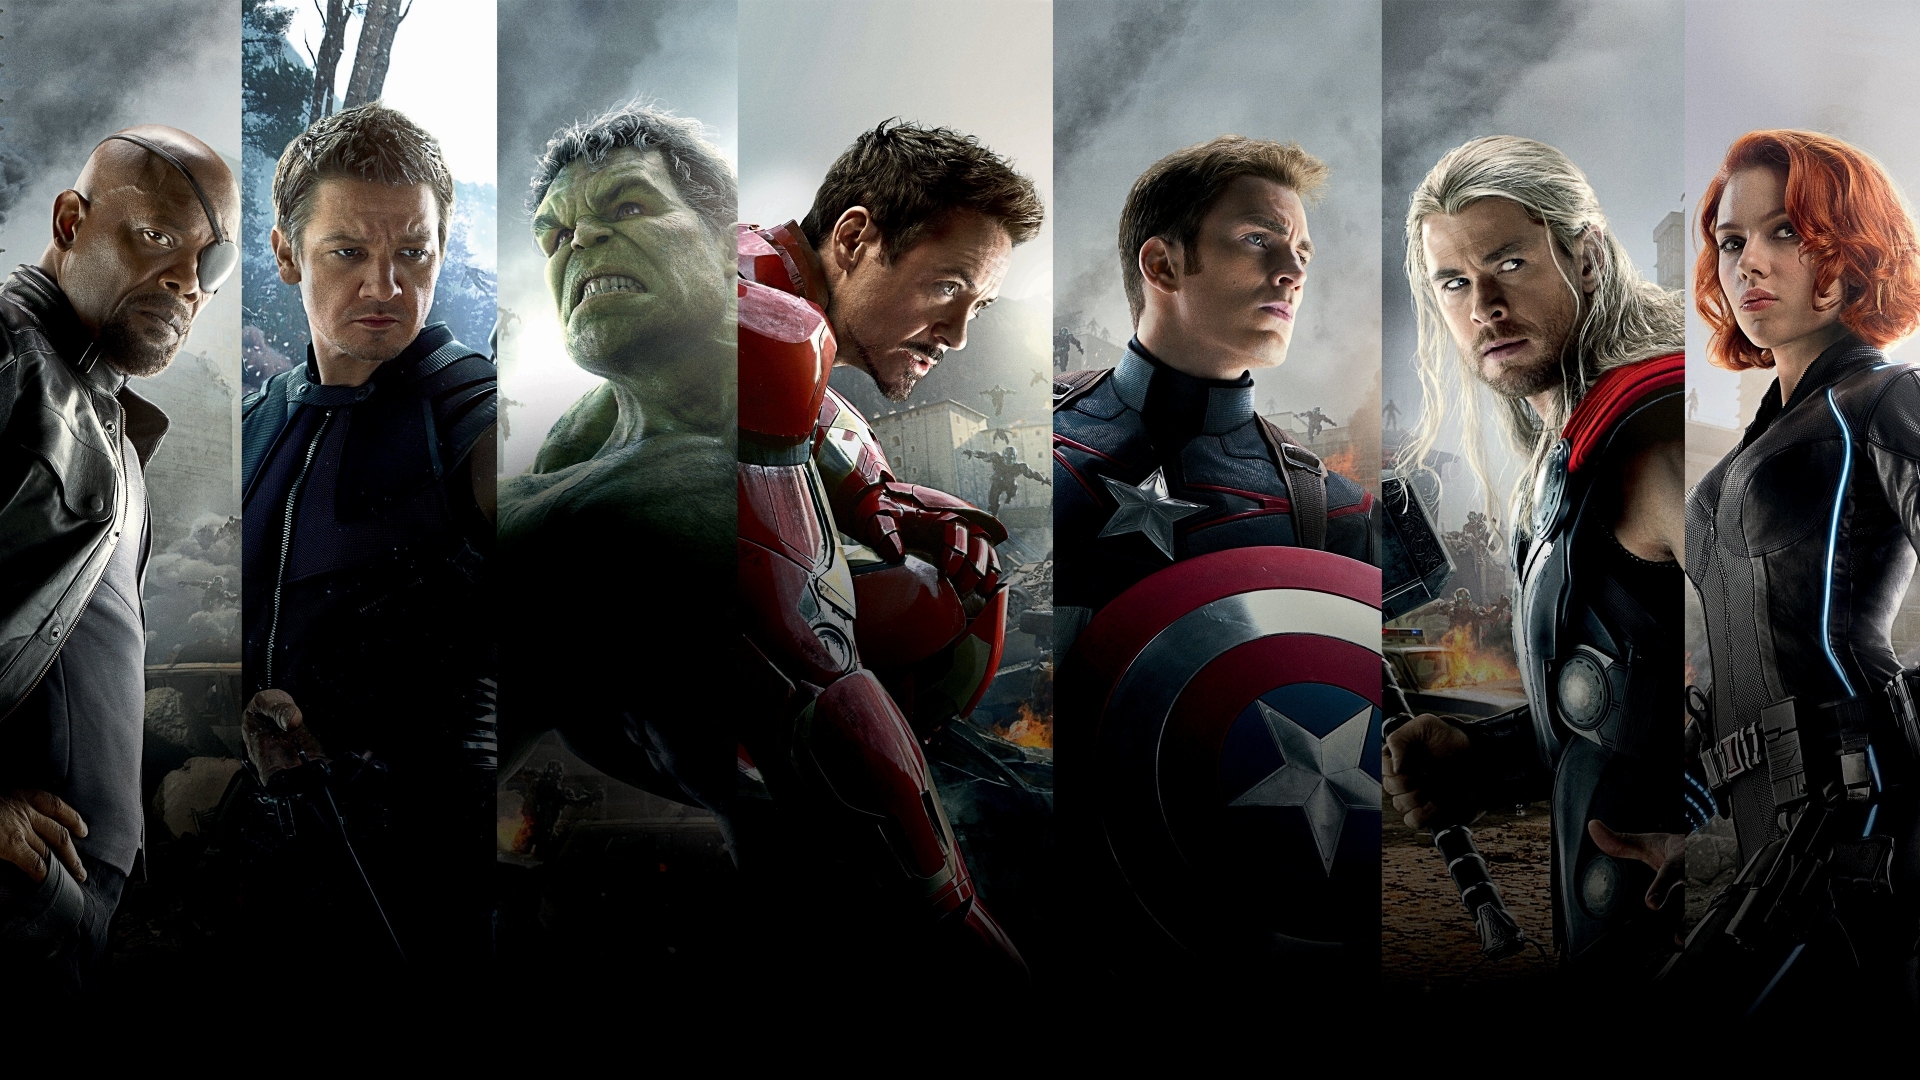 Avengers Age of Ultron for 1920 x 1080 HDTV 1080p resolution